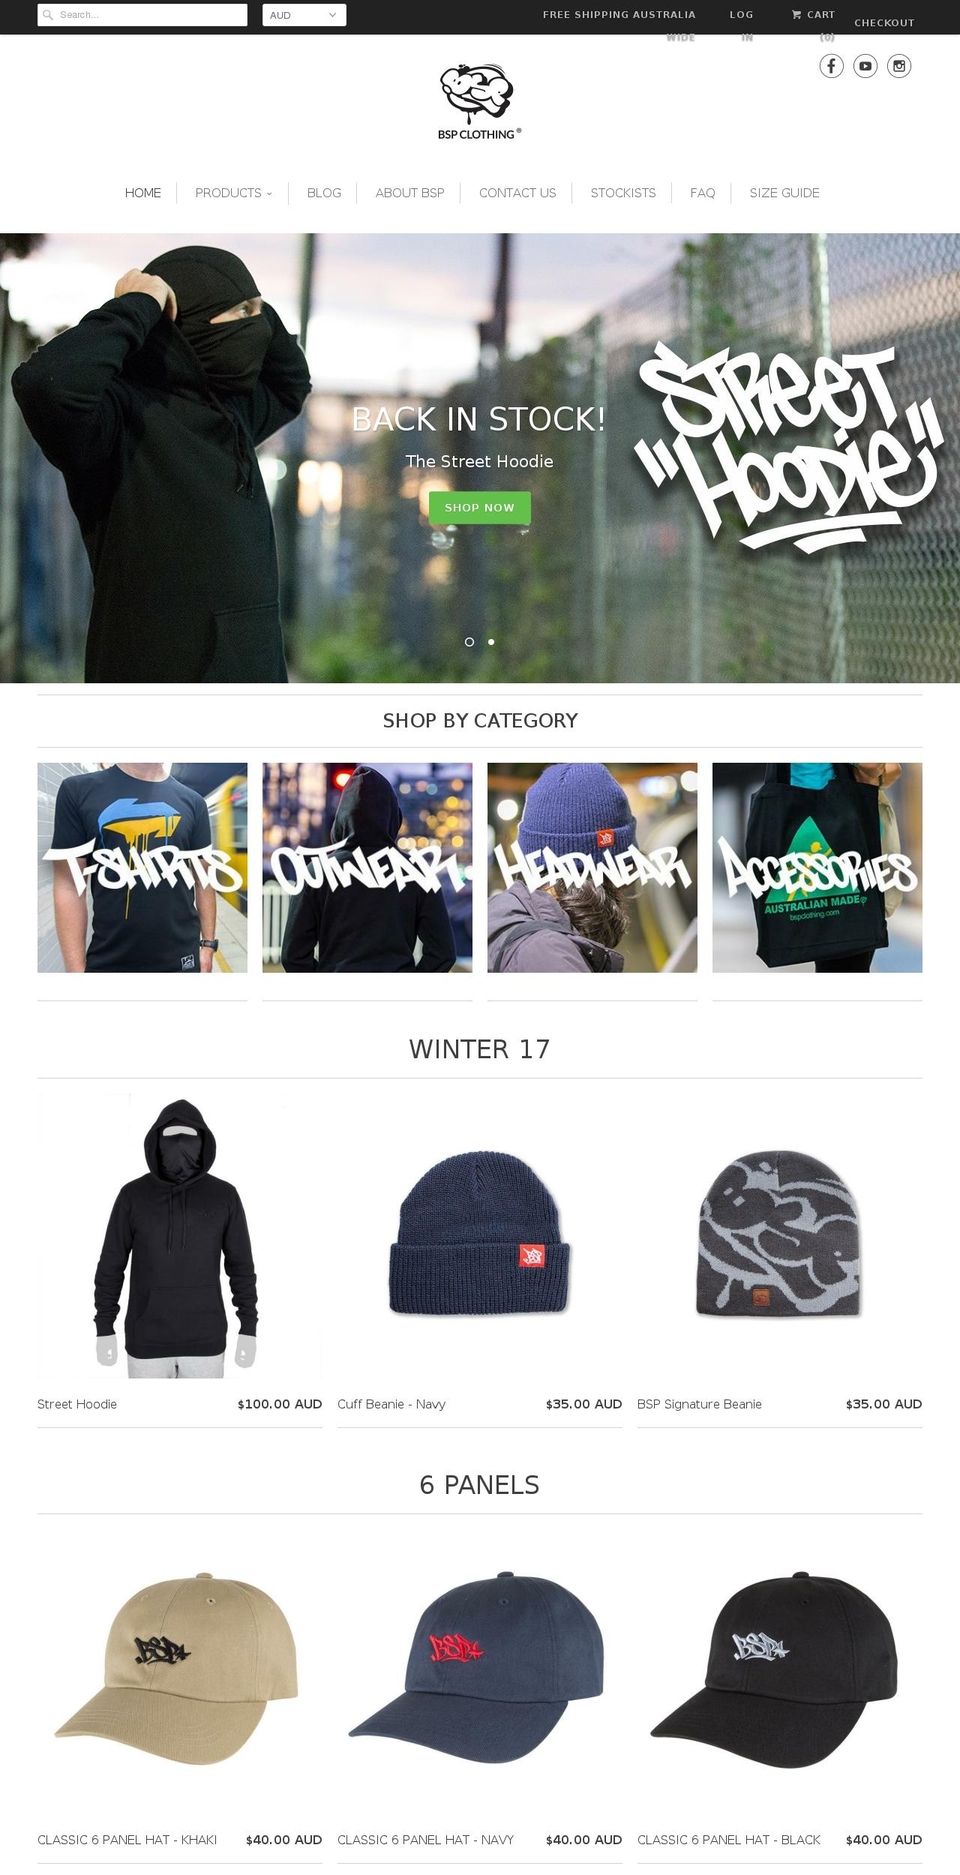 Portland Shopify theme site example bspclothing.com